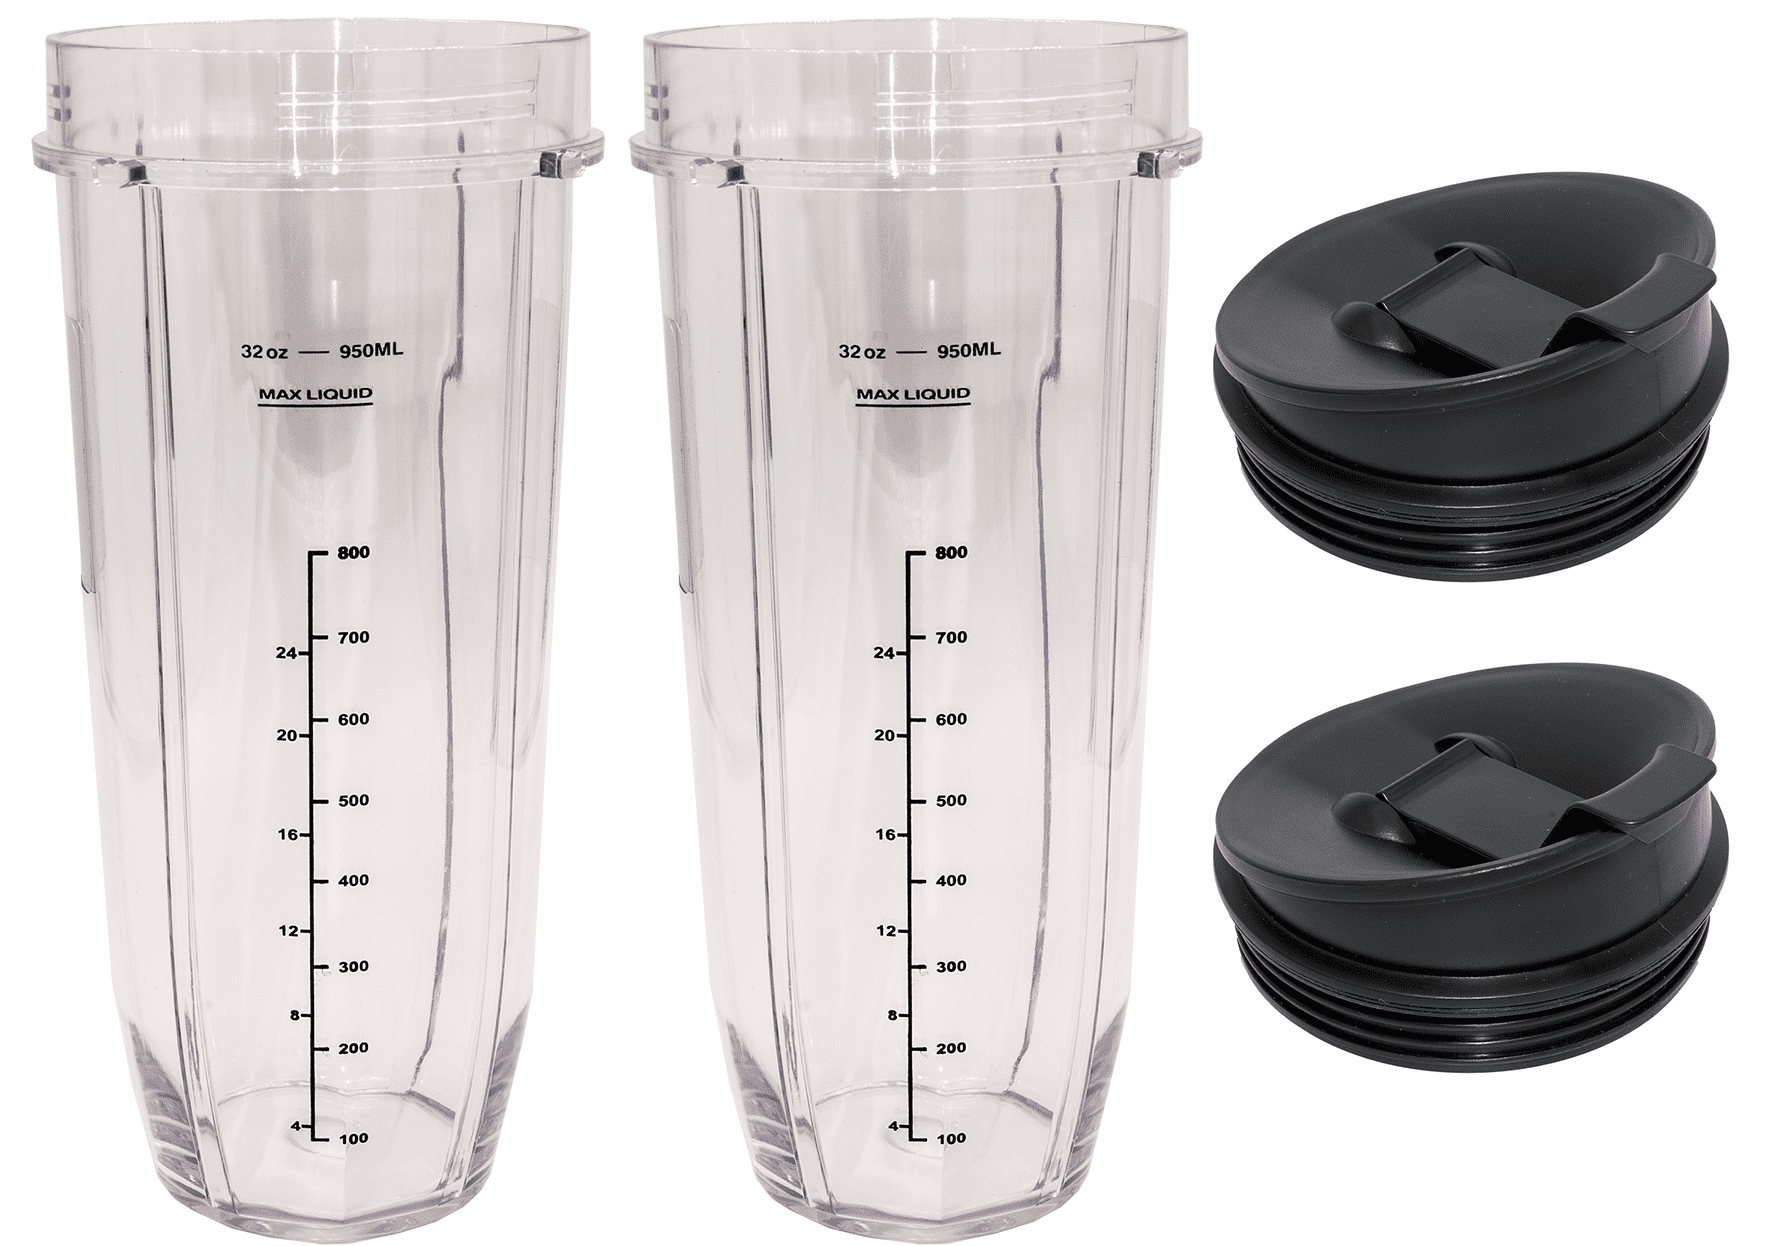 2 Pack 12 oz Cup with Sip & Seal Lid and Extractor Blade (7-Fins) Replacement Part Compatible with Nutri Ninja Auto-iQ